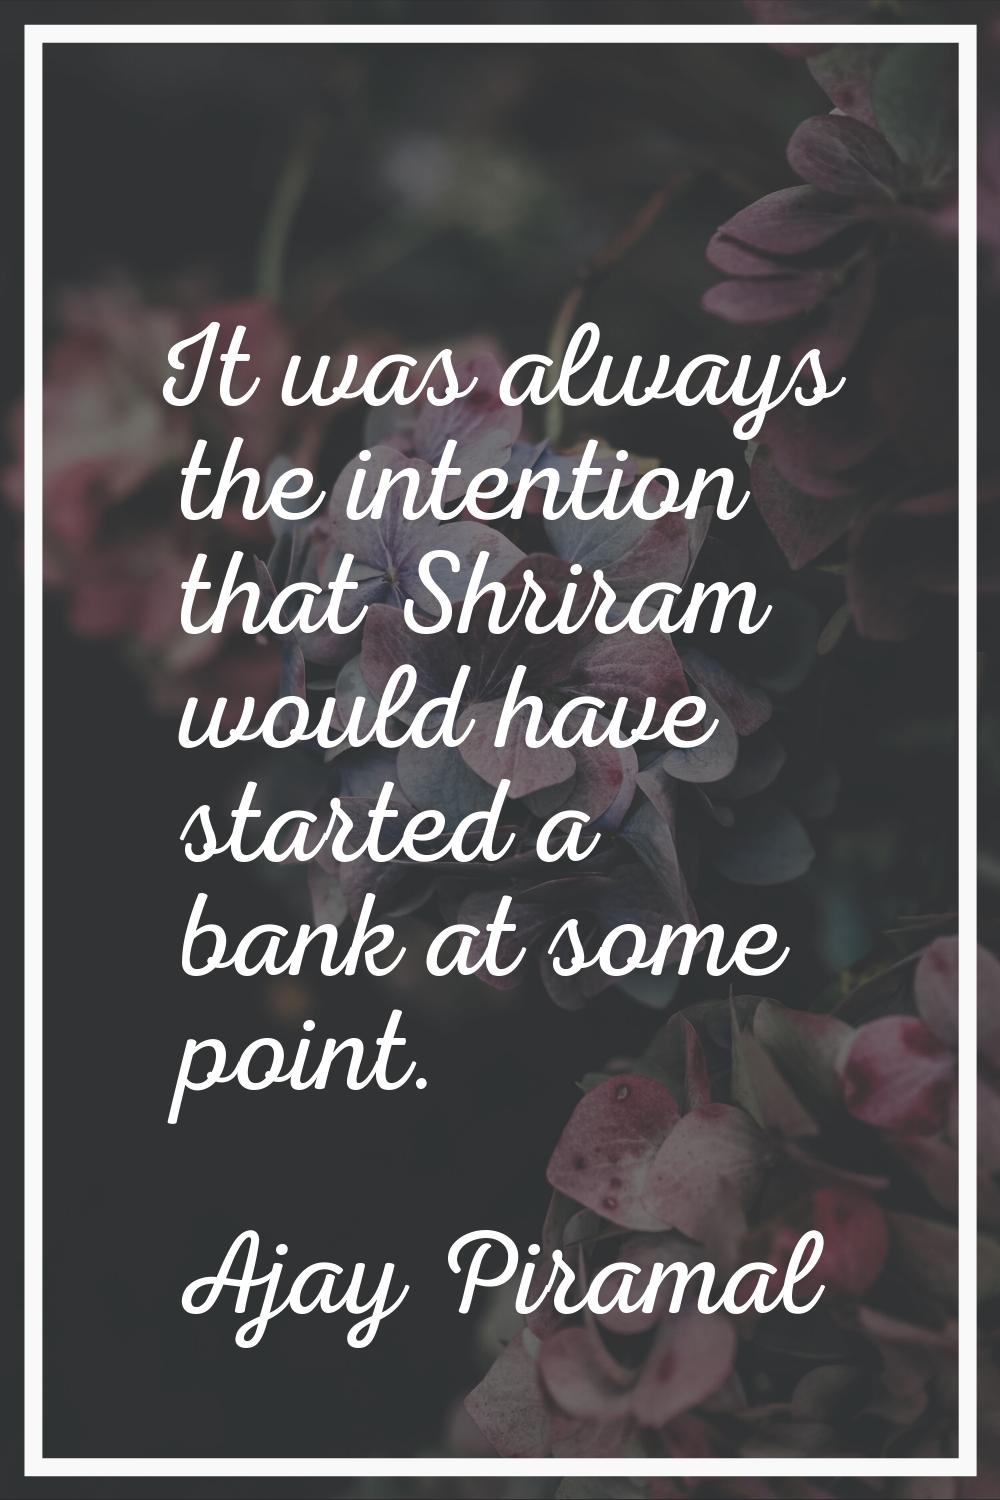 It was always the intention that Shriram would have started a bank at some point.